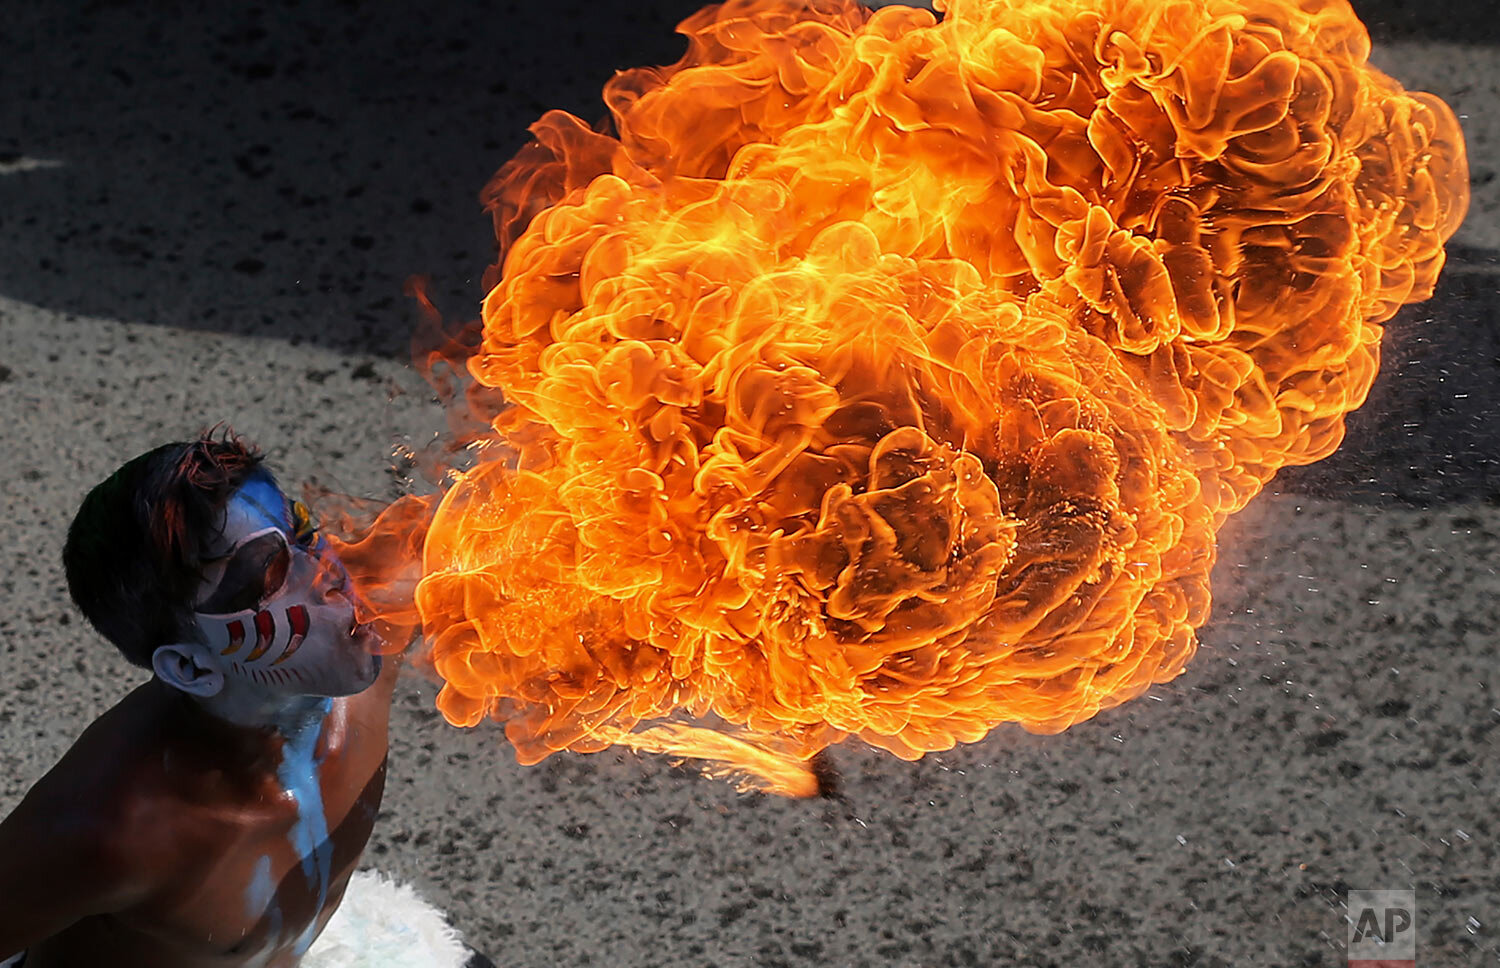  An Indian artist performs a fire act during a procession as part of "Bonalu" festival in Hyderabad, India, Monday, Aug. 2, 2021. (AP Photo/Mahesh Kumar A.) 